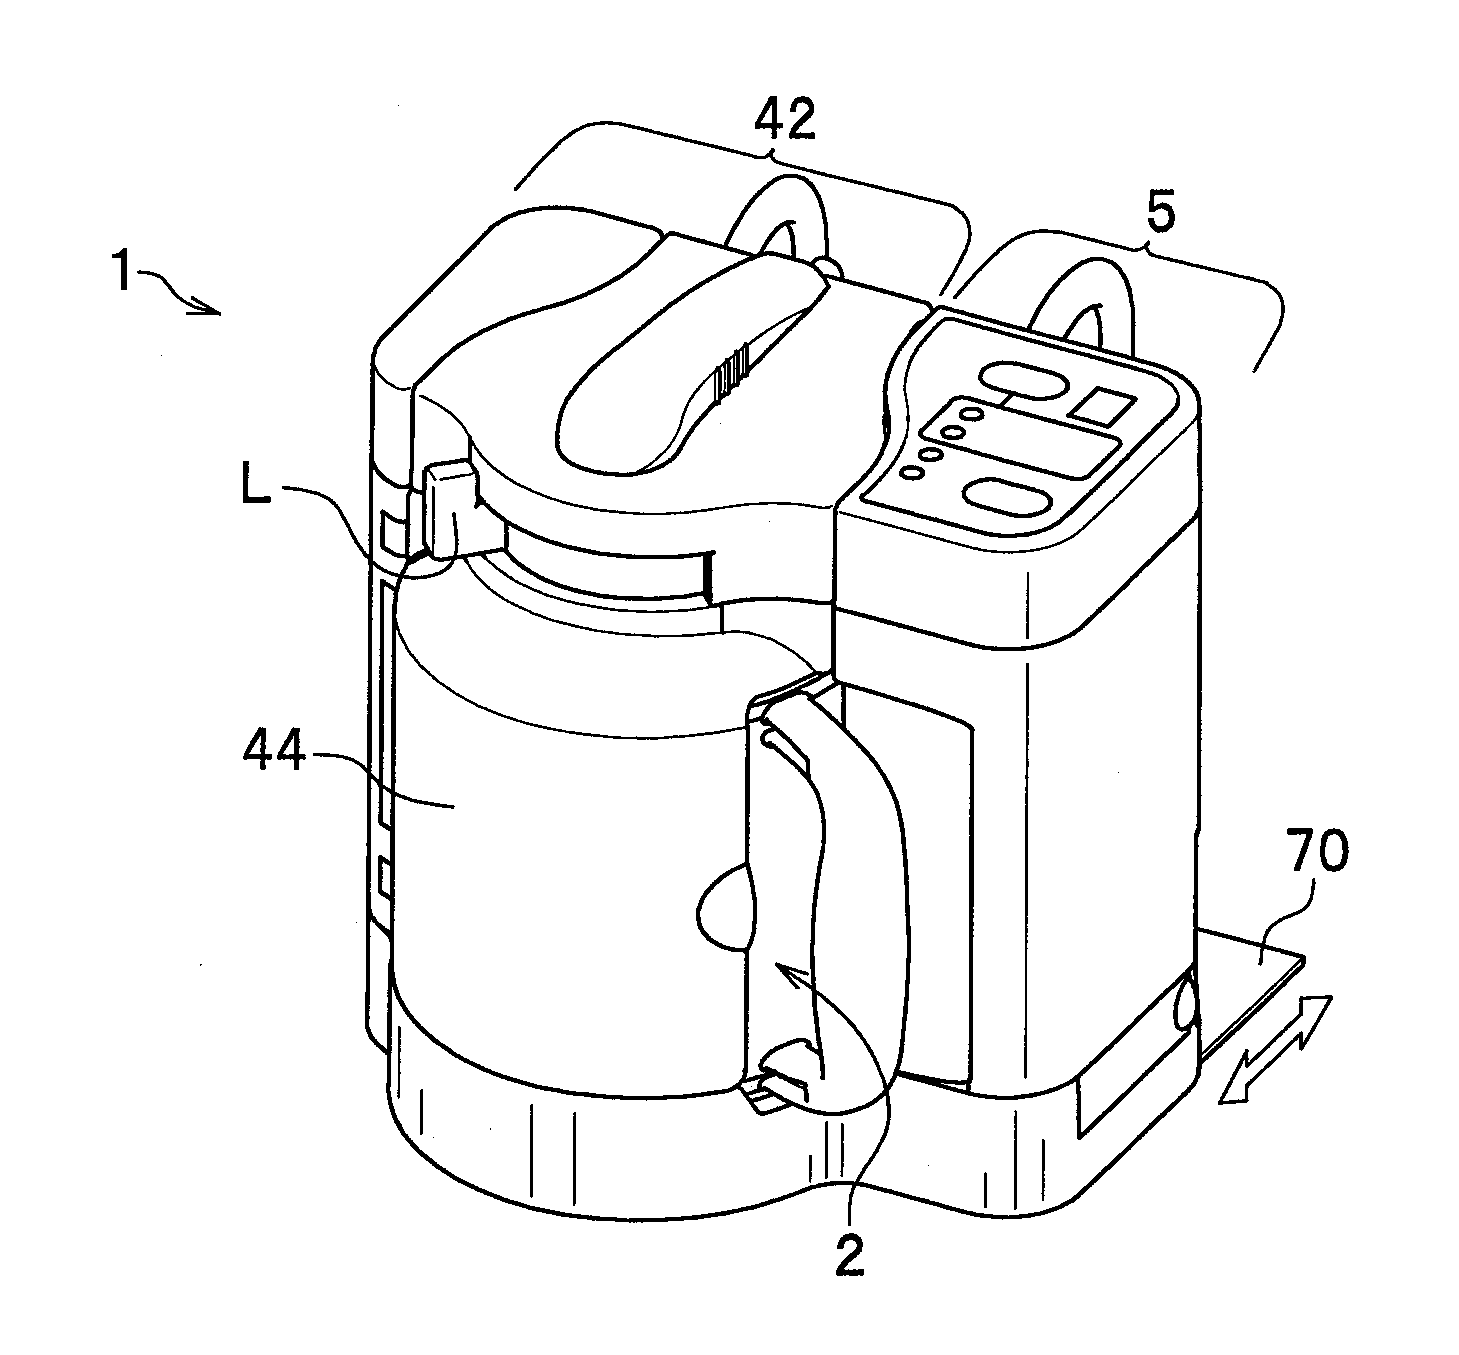 Automatic urine collection apparatus